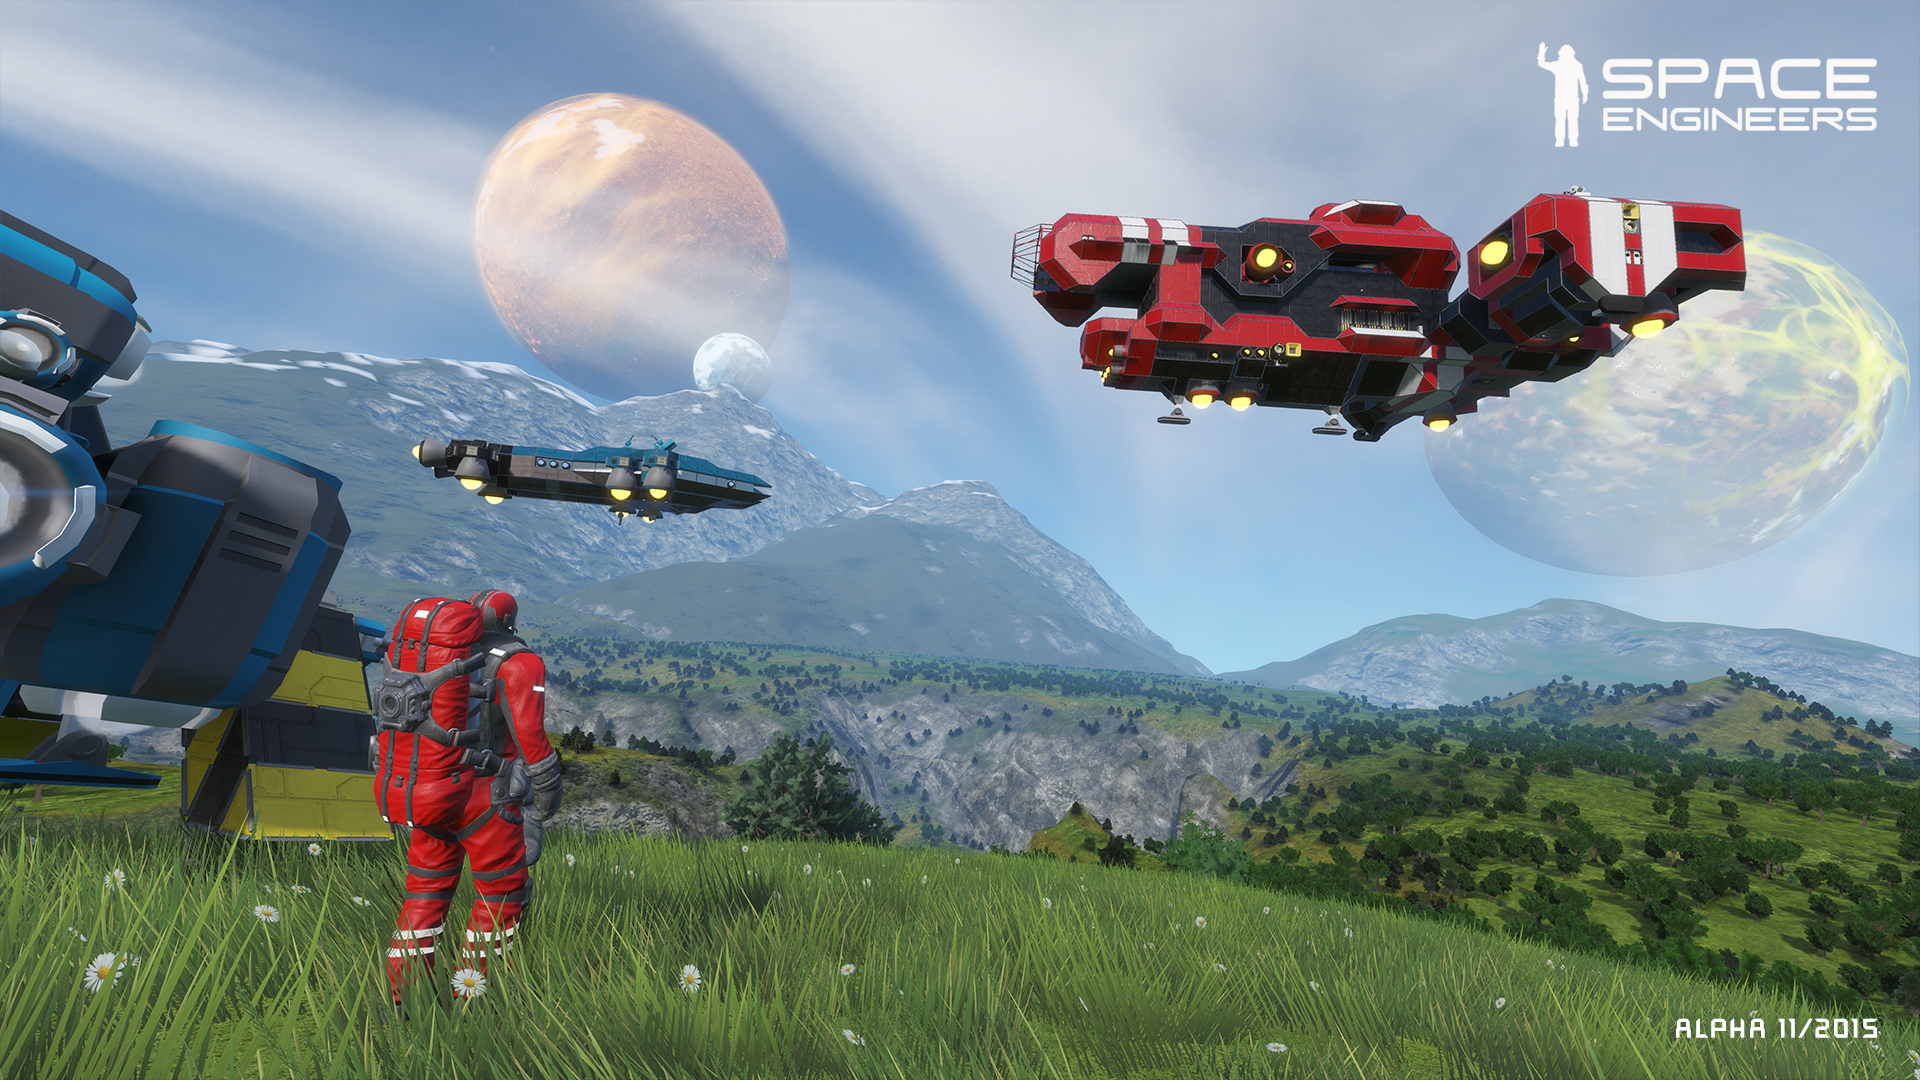 how to space engineers for free